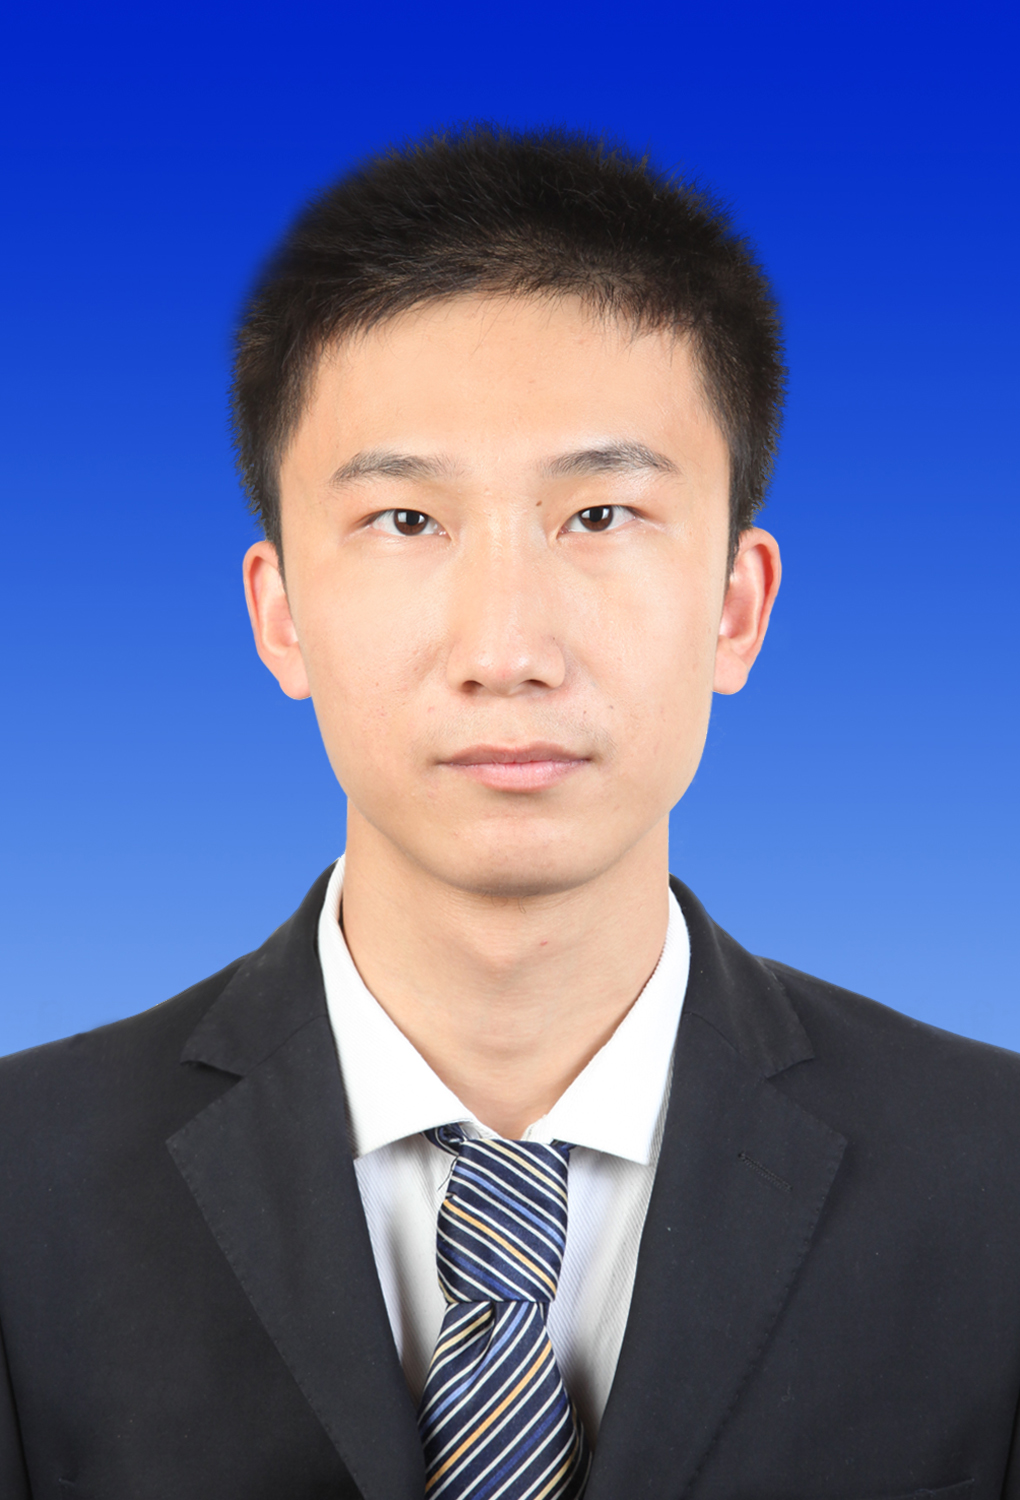 Congratulations to one of our outstanding TTU IMSE Ph.D. students, Dongzhe Zhang, for receiving the Paul Whitfield Horn Distinguished Professors Award at Texas Tech University.